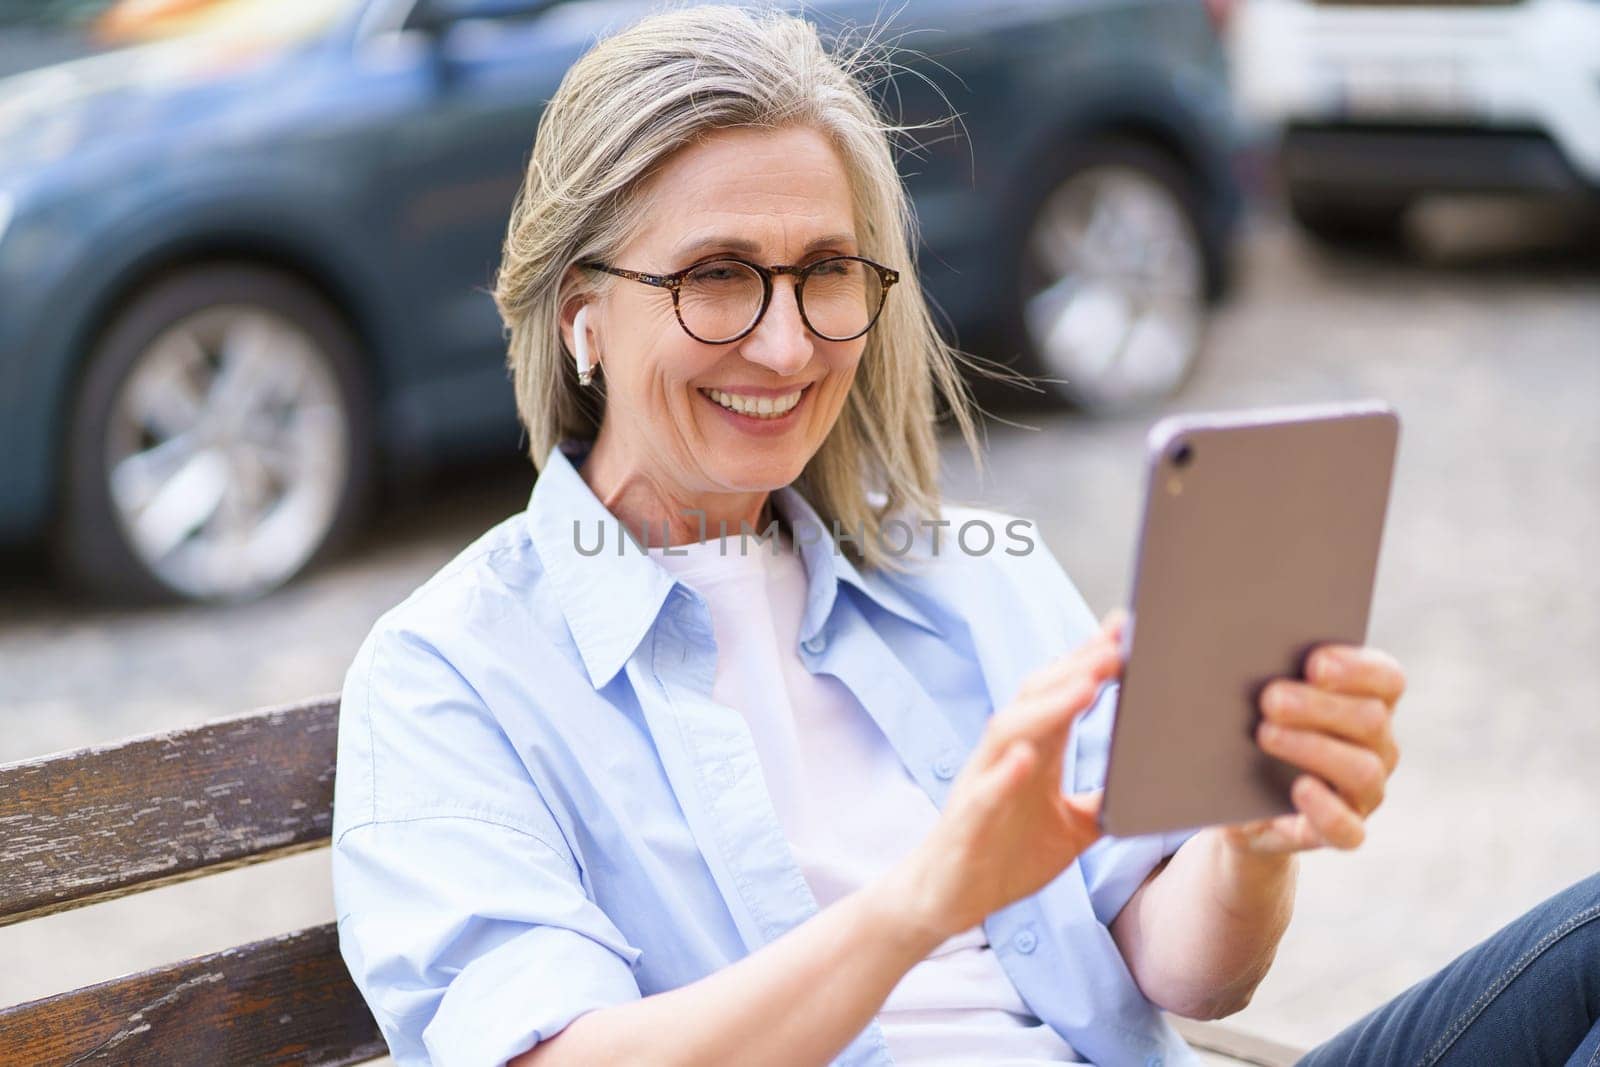 Happy and confident mature woman smiles while holding tablet PC and taking call in busy city. The urban scene and modern technology convey sense of connectivity and convenience, while the woman's positive energy and independent spirit inspire success and vibrancy. by LipikStockMedia